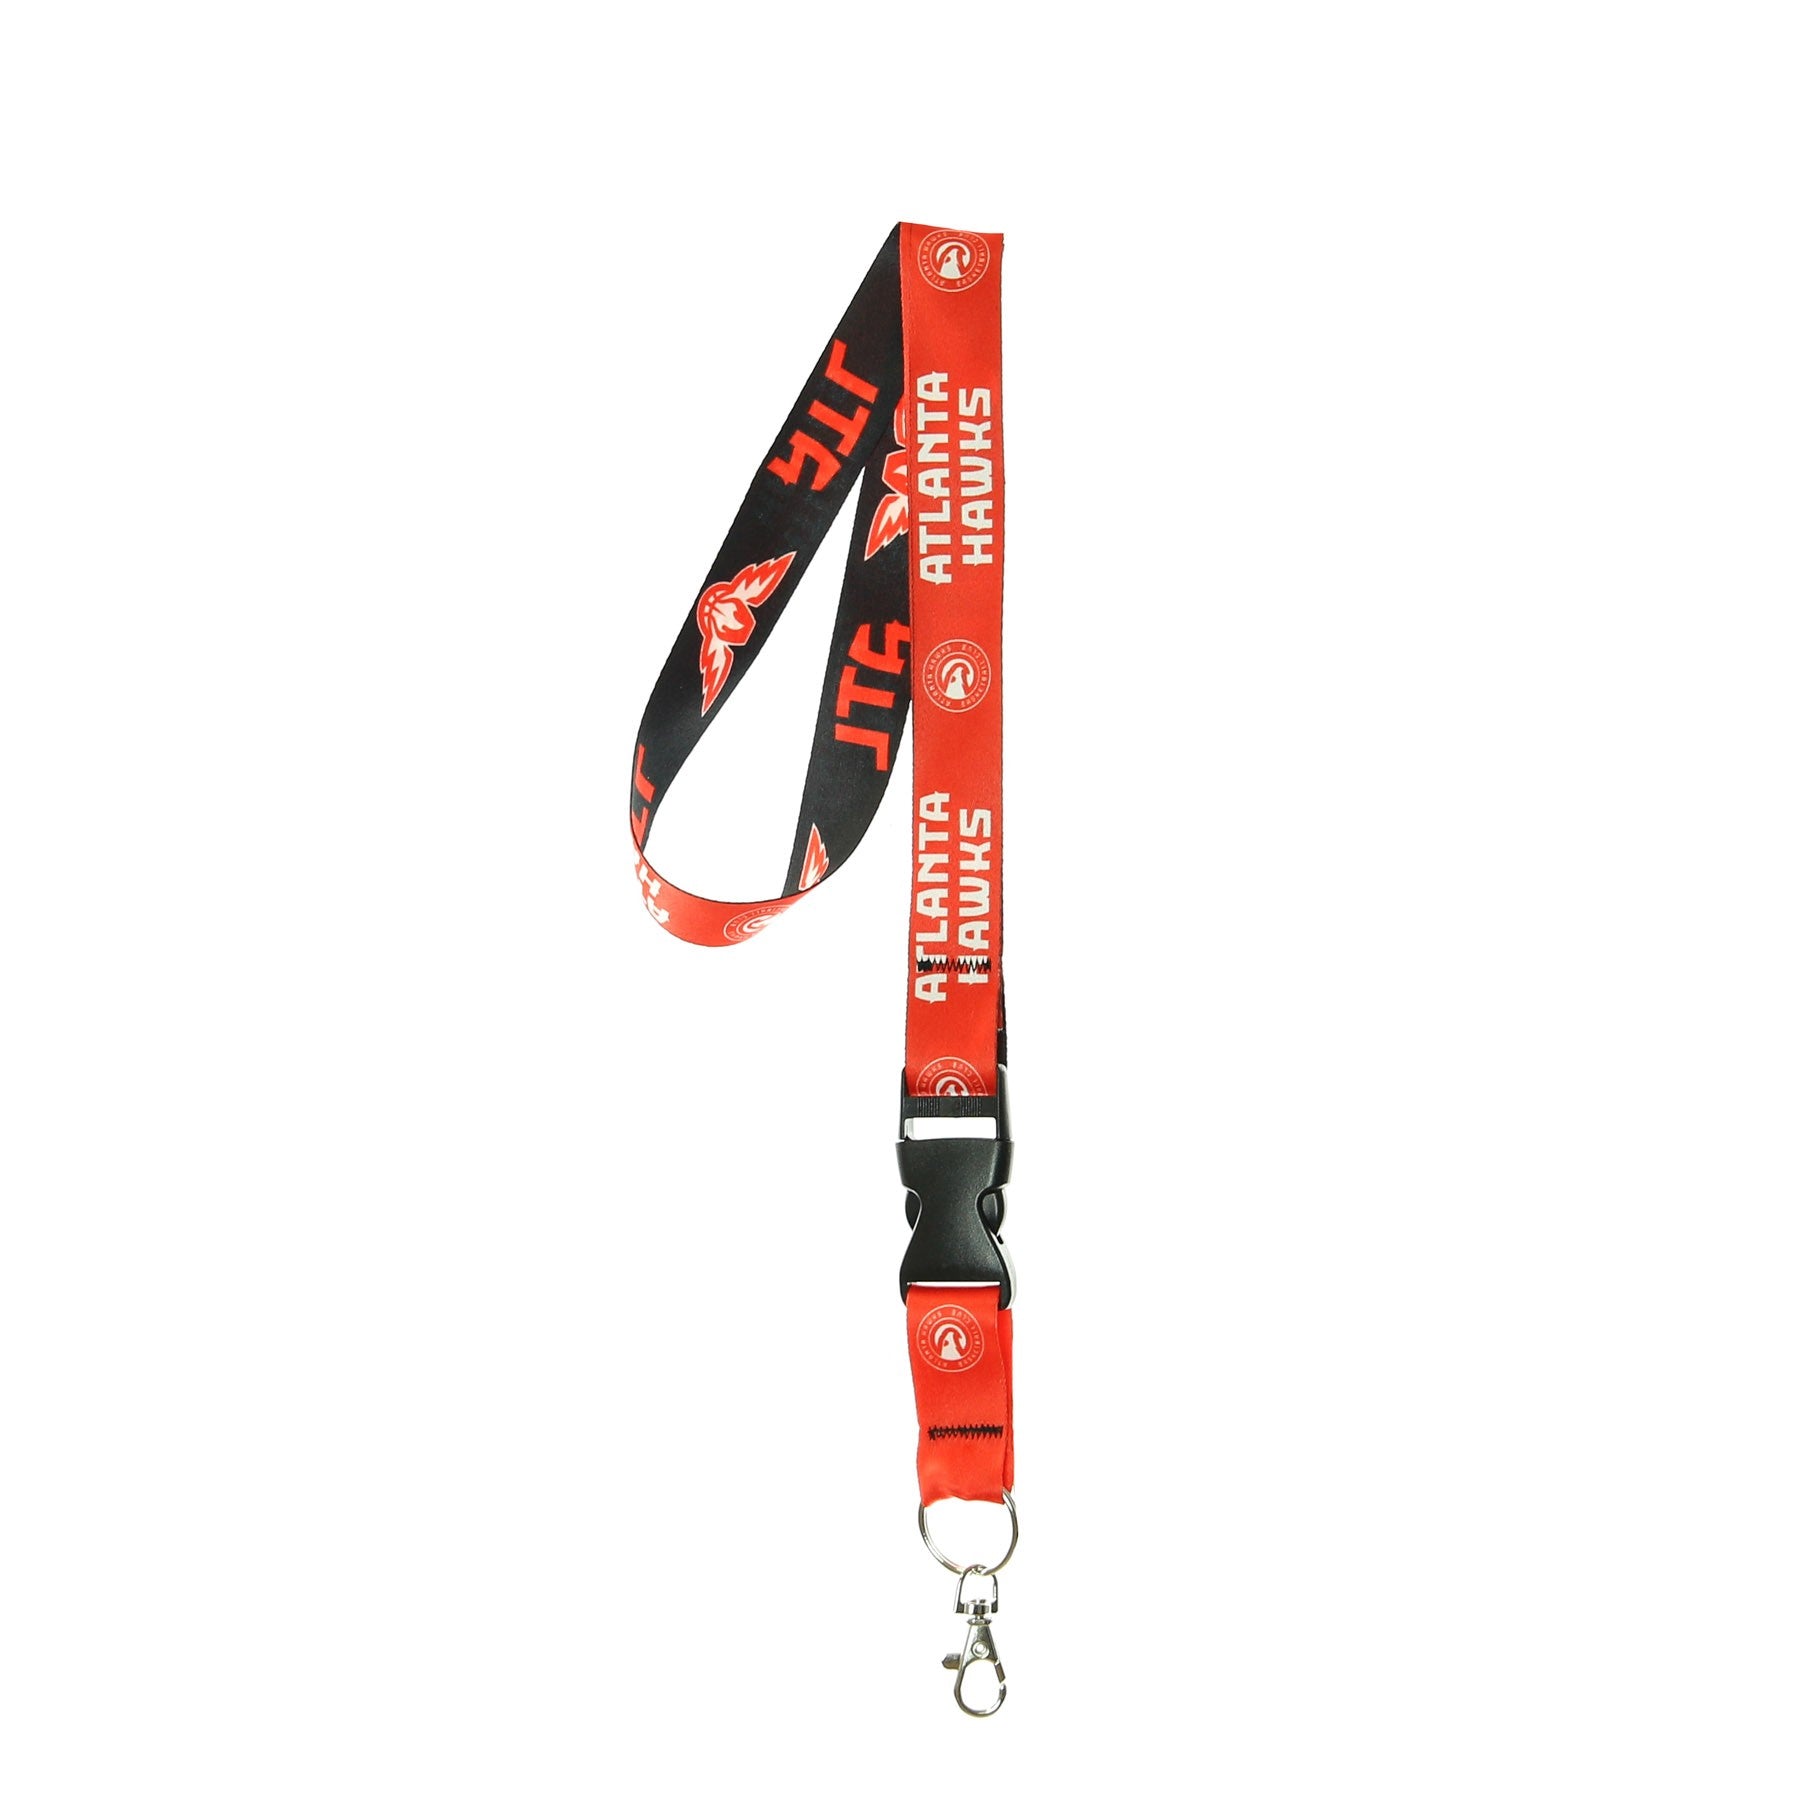 Portachiavi Laccetto Unisex Nba Lanyard With Buckle Atlhaw Original Team Colors